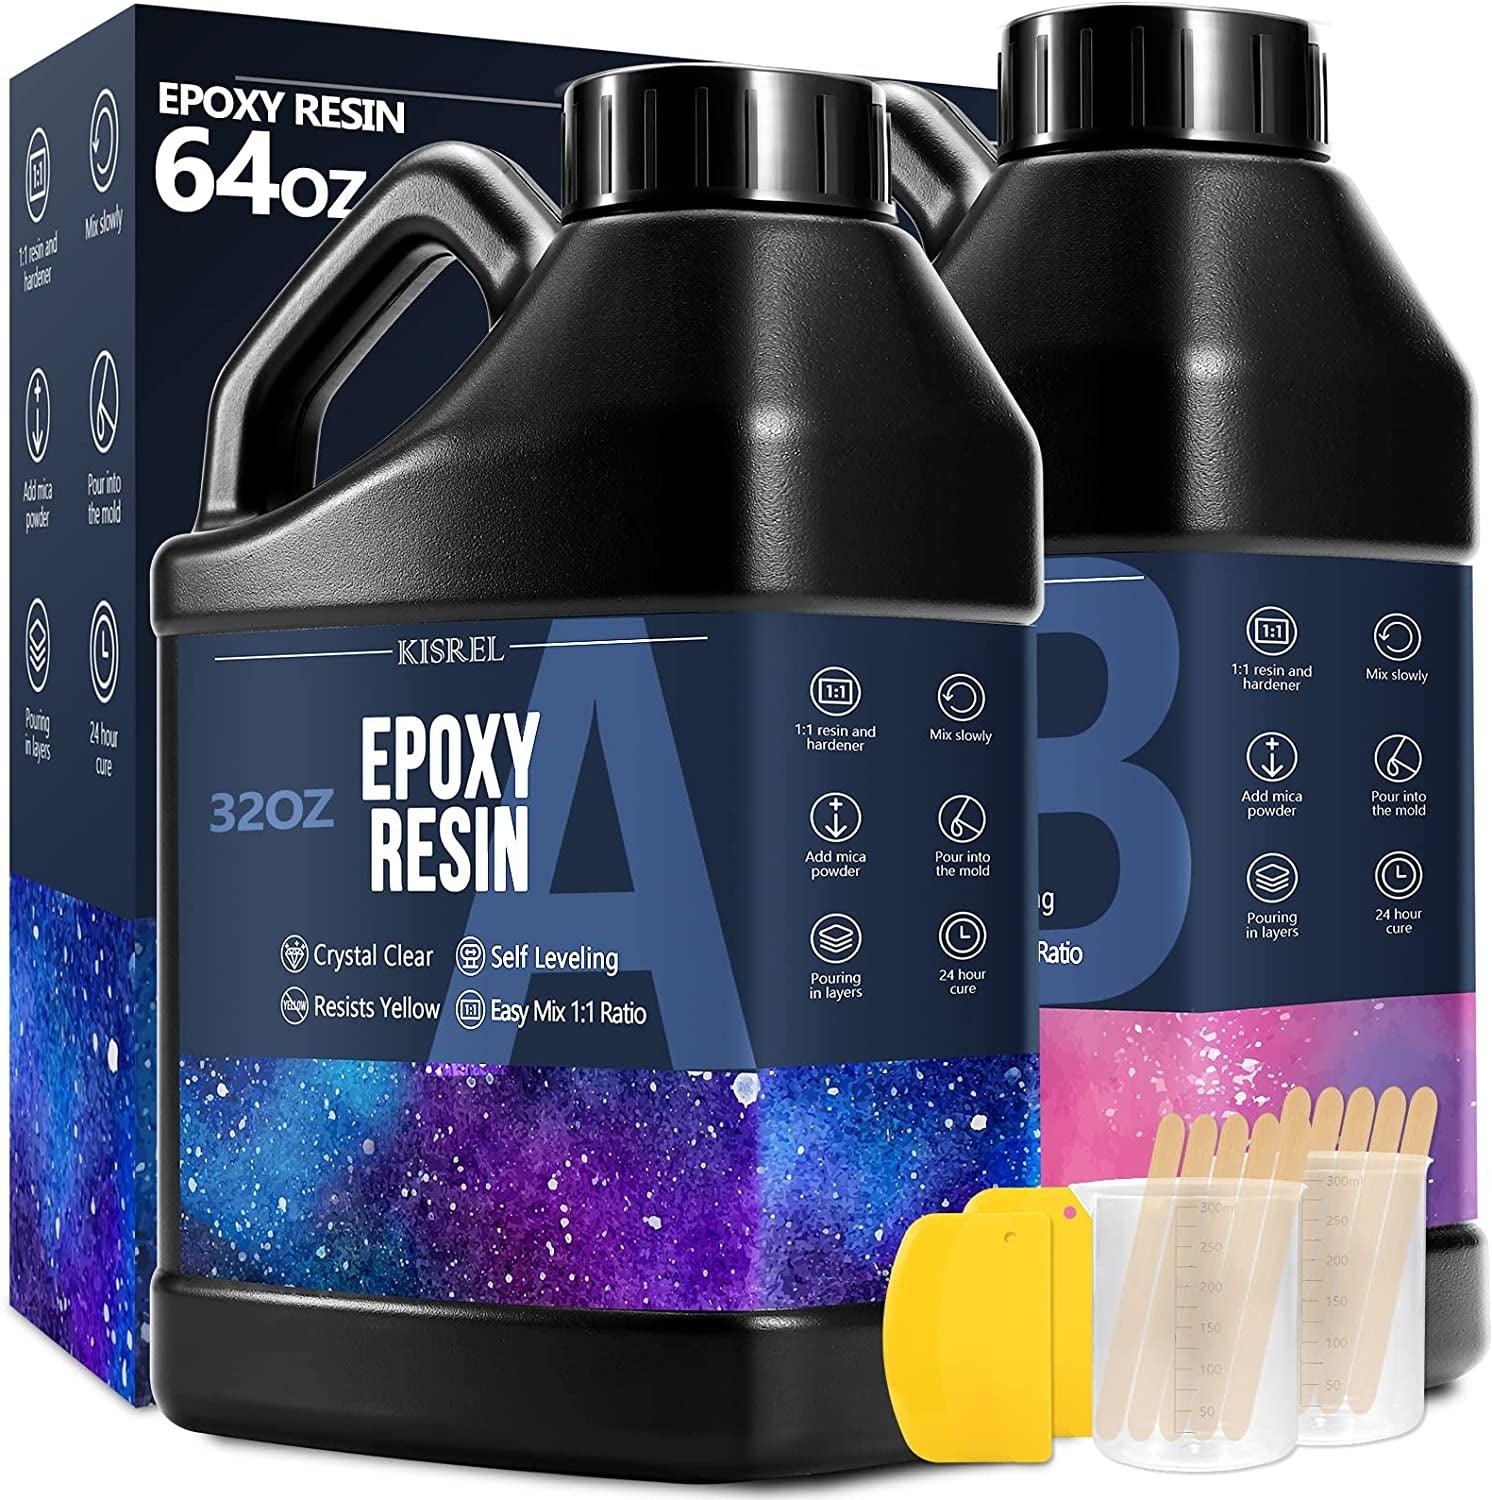 Epoxy Resin Kit for Beginners - 15.5 FL.OZ. Crystal Clear Casting